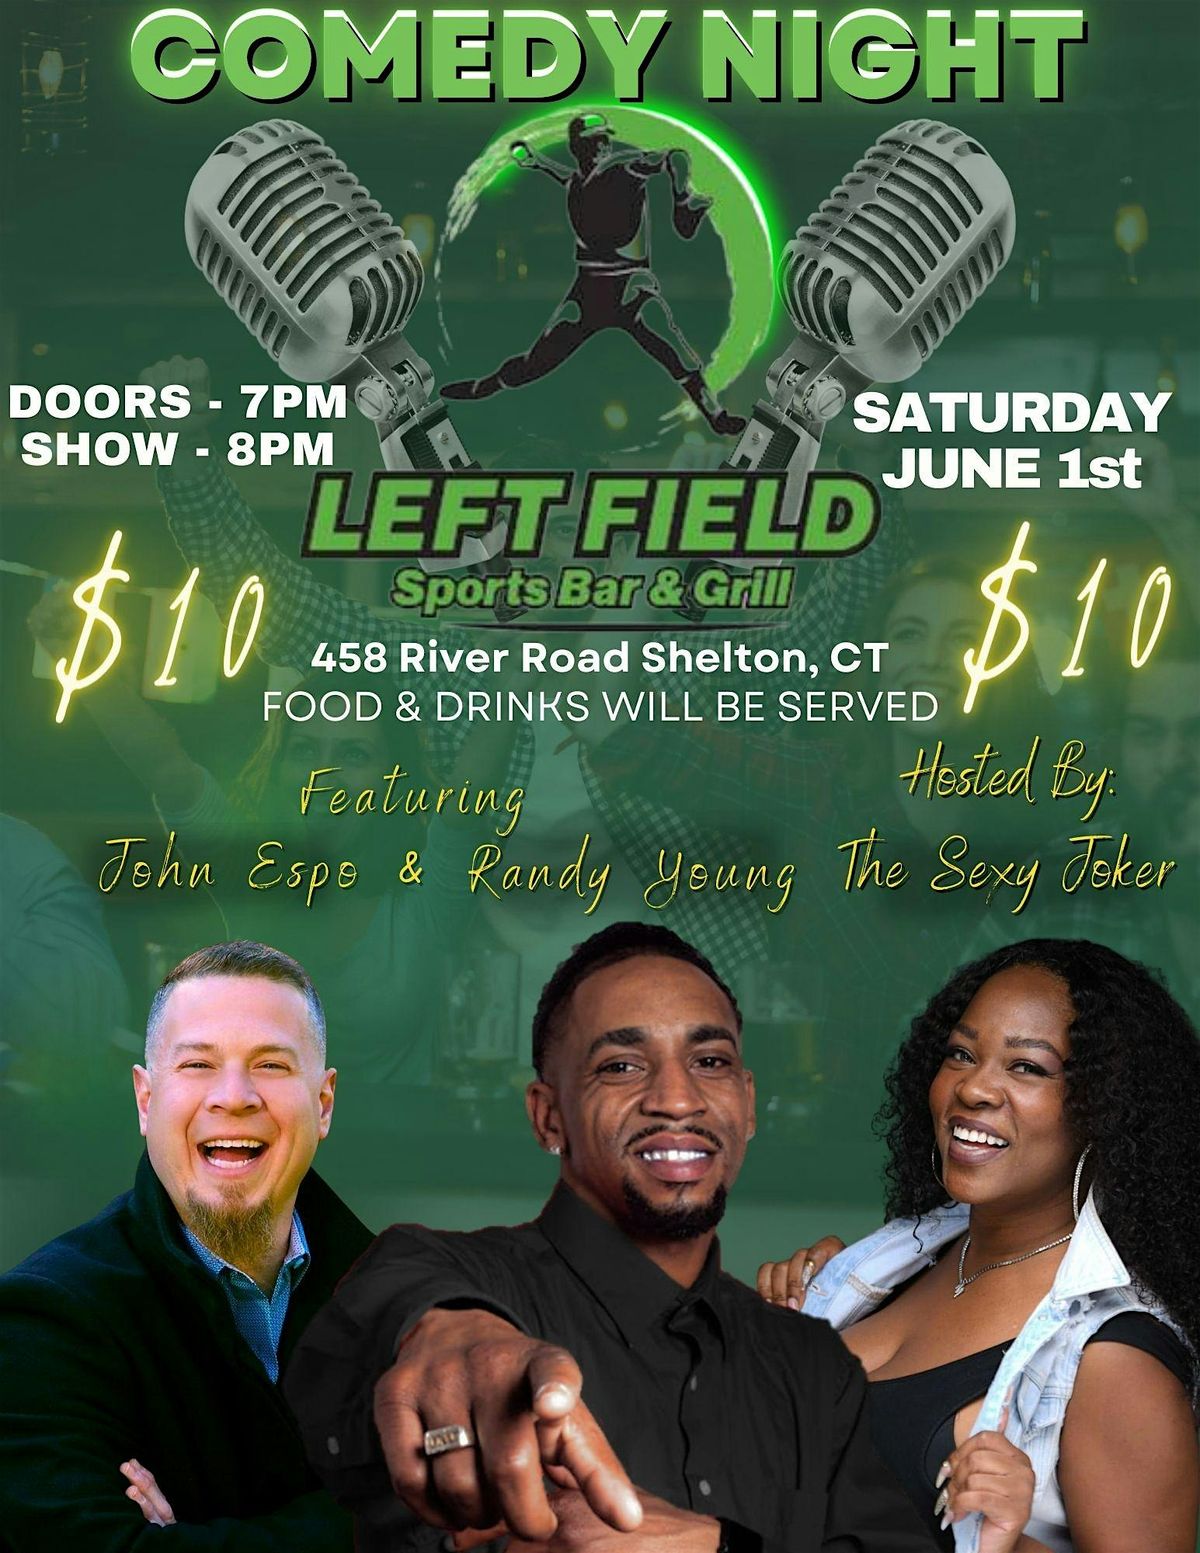 COMEDY NIGHT at LEFT FIELD SPORTS BAR AND GRILL